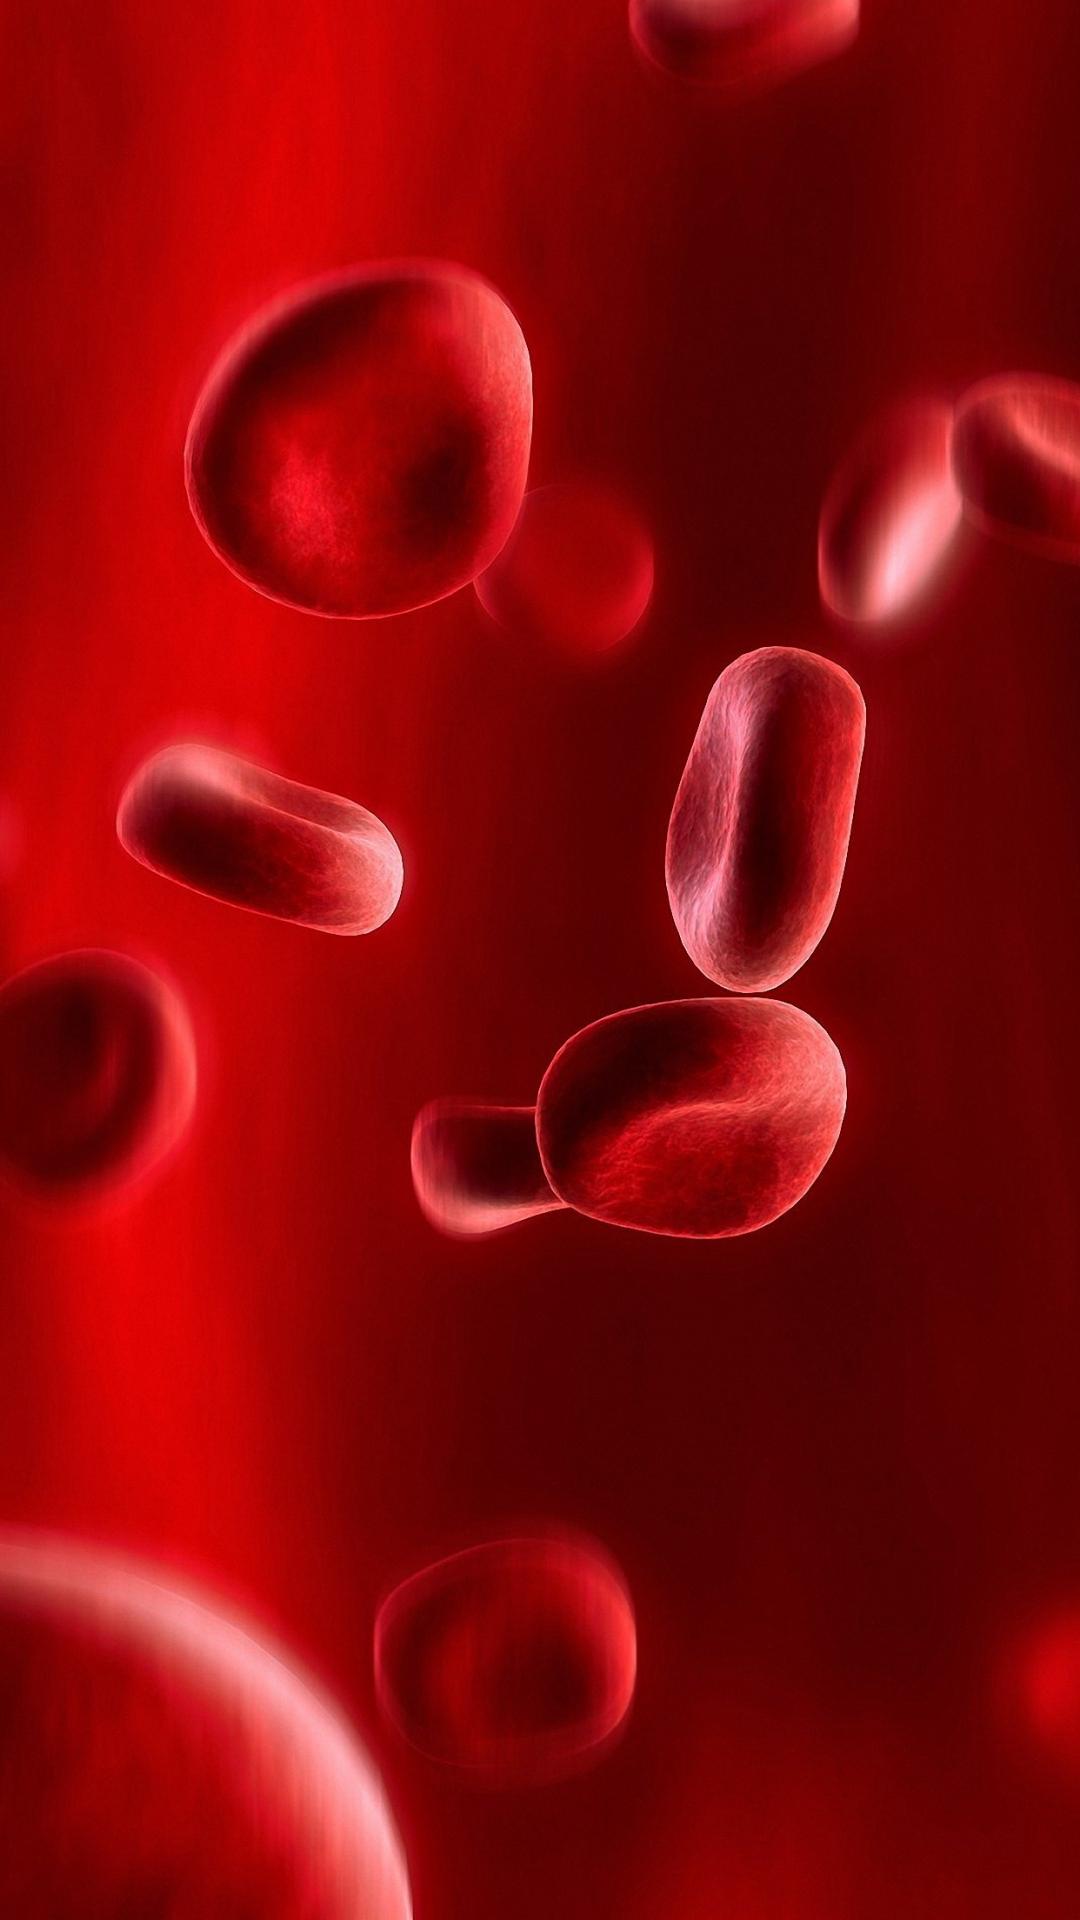 Red 3D Blood Cells iphone 6s plus Wallpaper HD